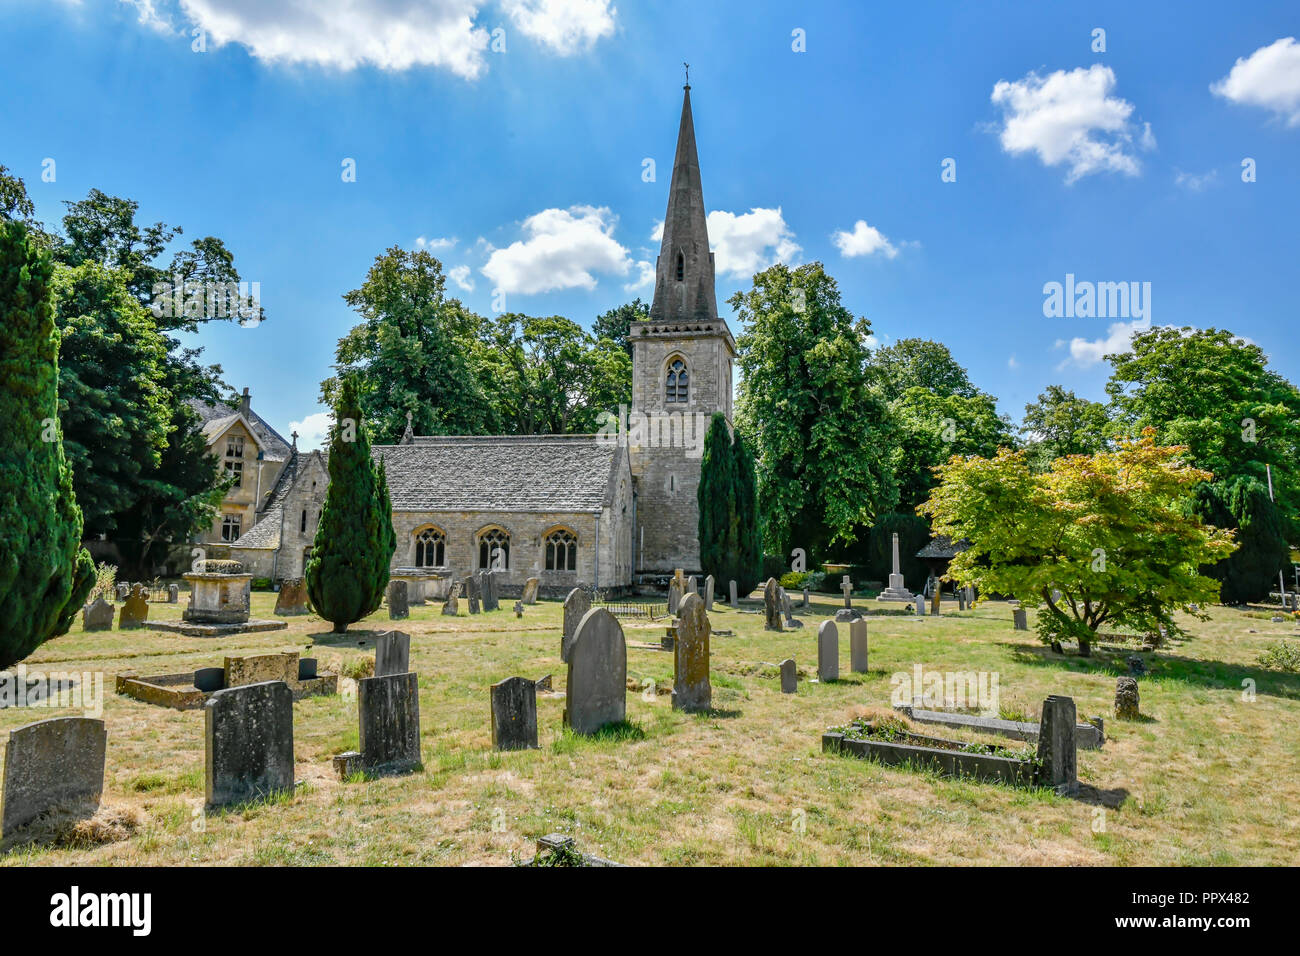 The Parish Church of Saint Mary Lower Slaughter is located in Lower Slaughter, Gloucestershire. England UK. The 13th century Anglican parish church is Stock Photo